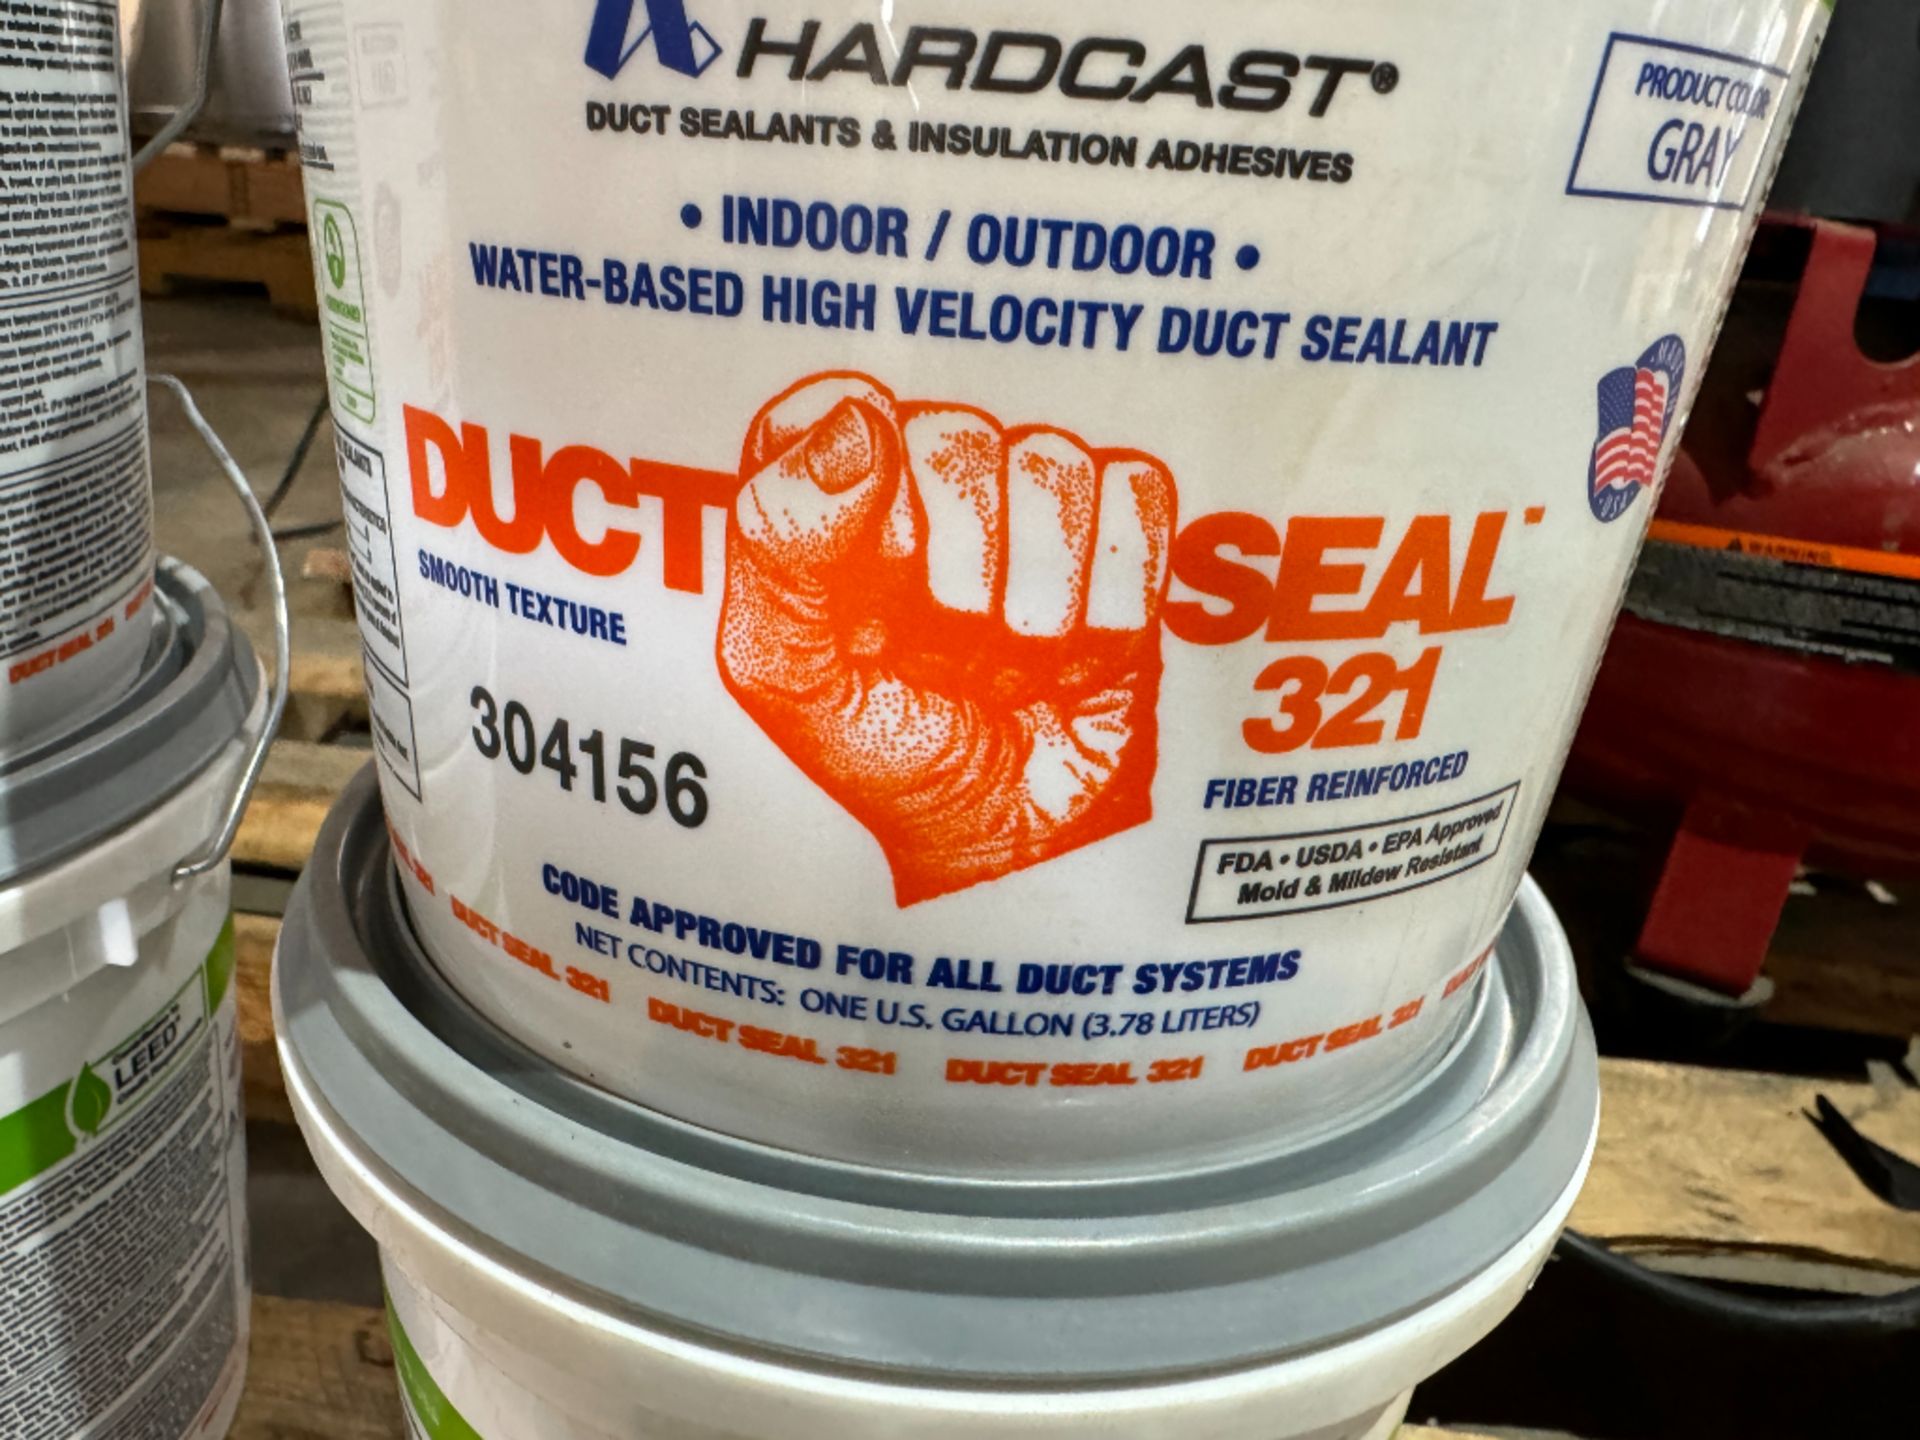 (4) 1 Gallon Tubs of Duct Seal - Image 2 of 3